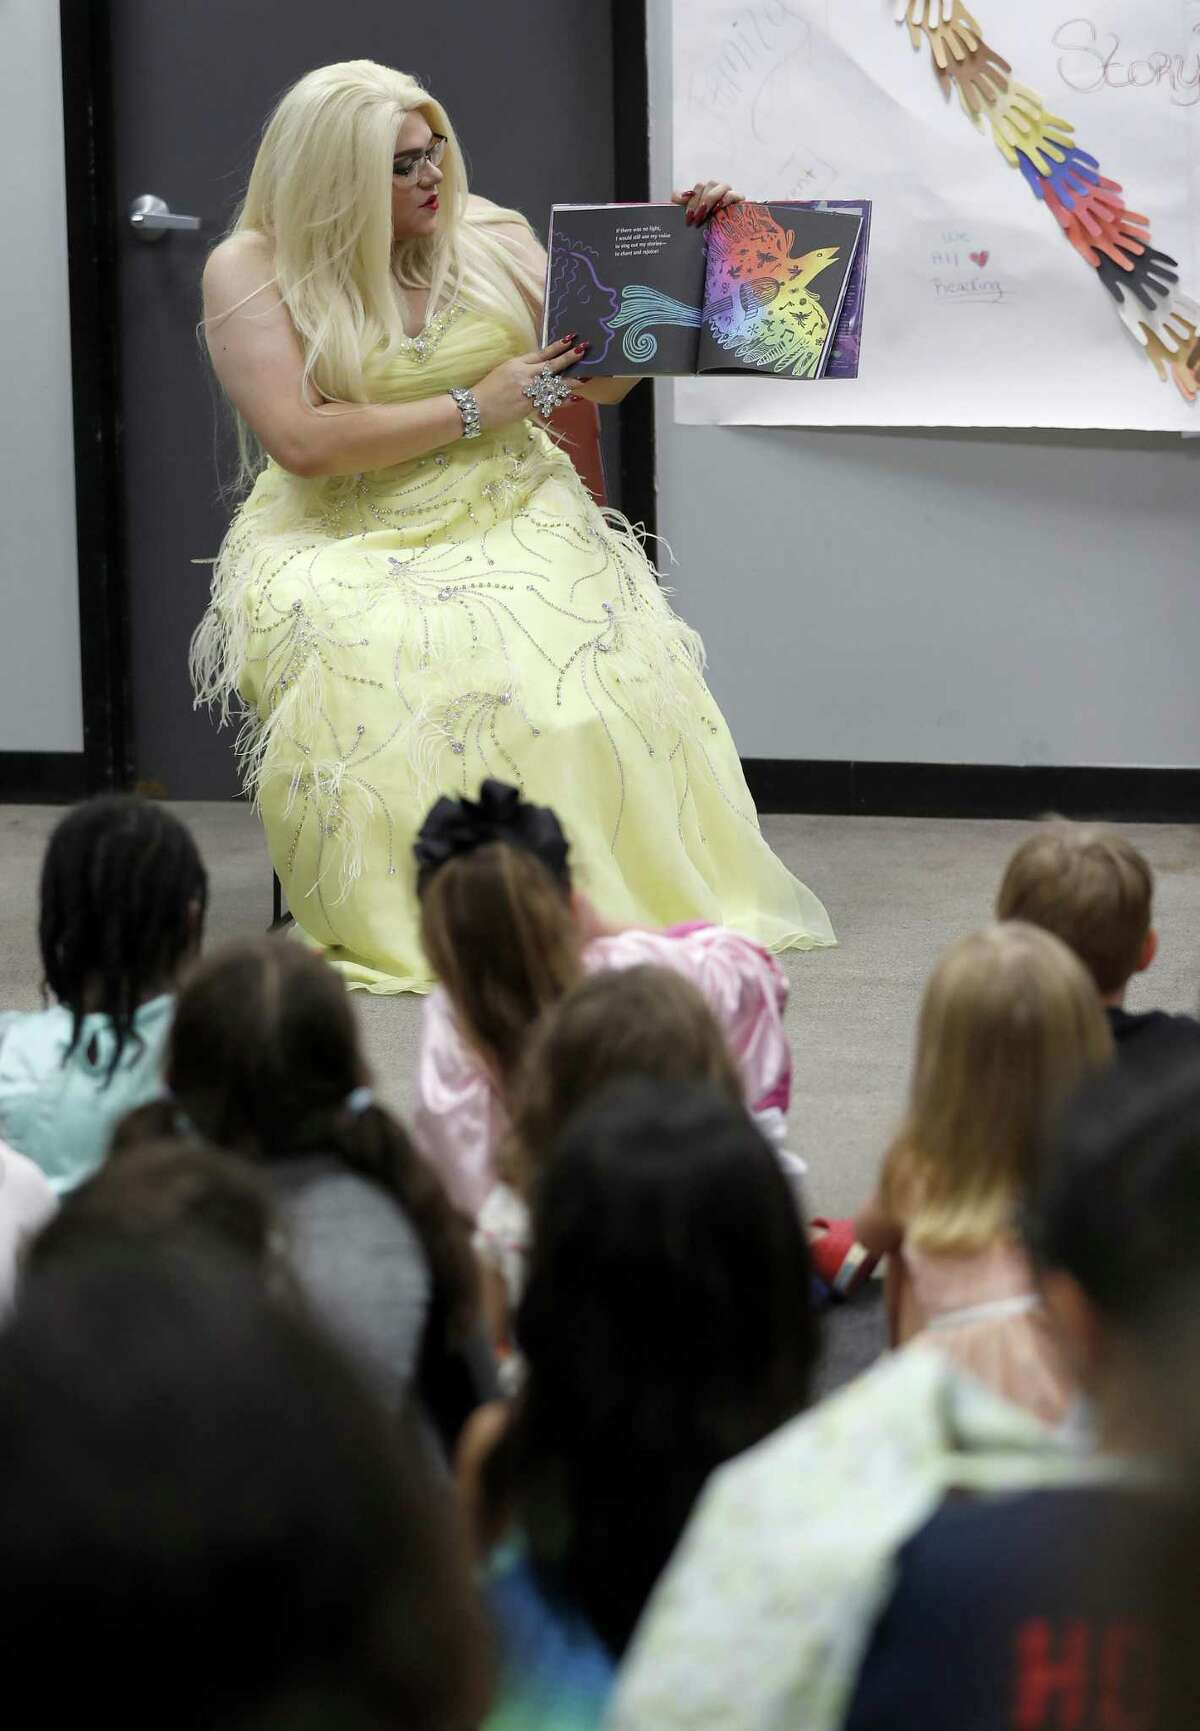 Tatiana reads a book to children during the monthly Drag Queen Story Time at Freed-Montrose Neighborhood Library, Saturday, September 29, 2018, in Houston. Saturday marked the one-year anniversary of the story hour, which happens on the last Saturday of every month.